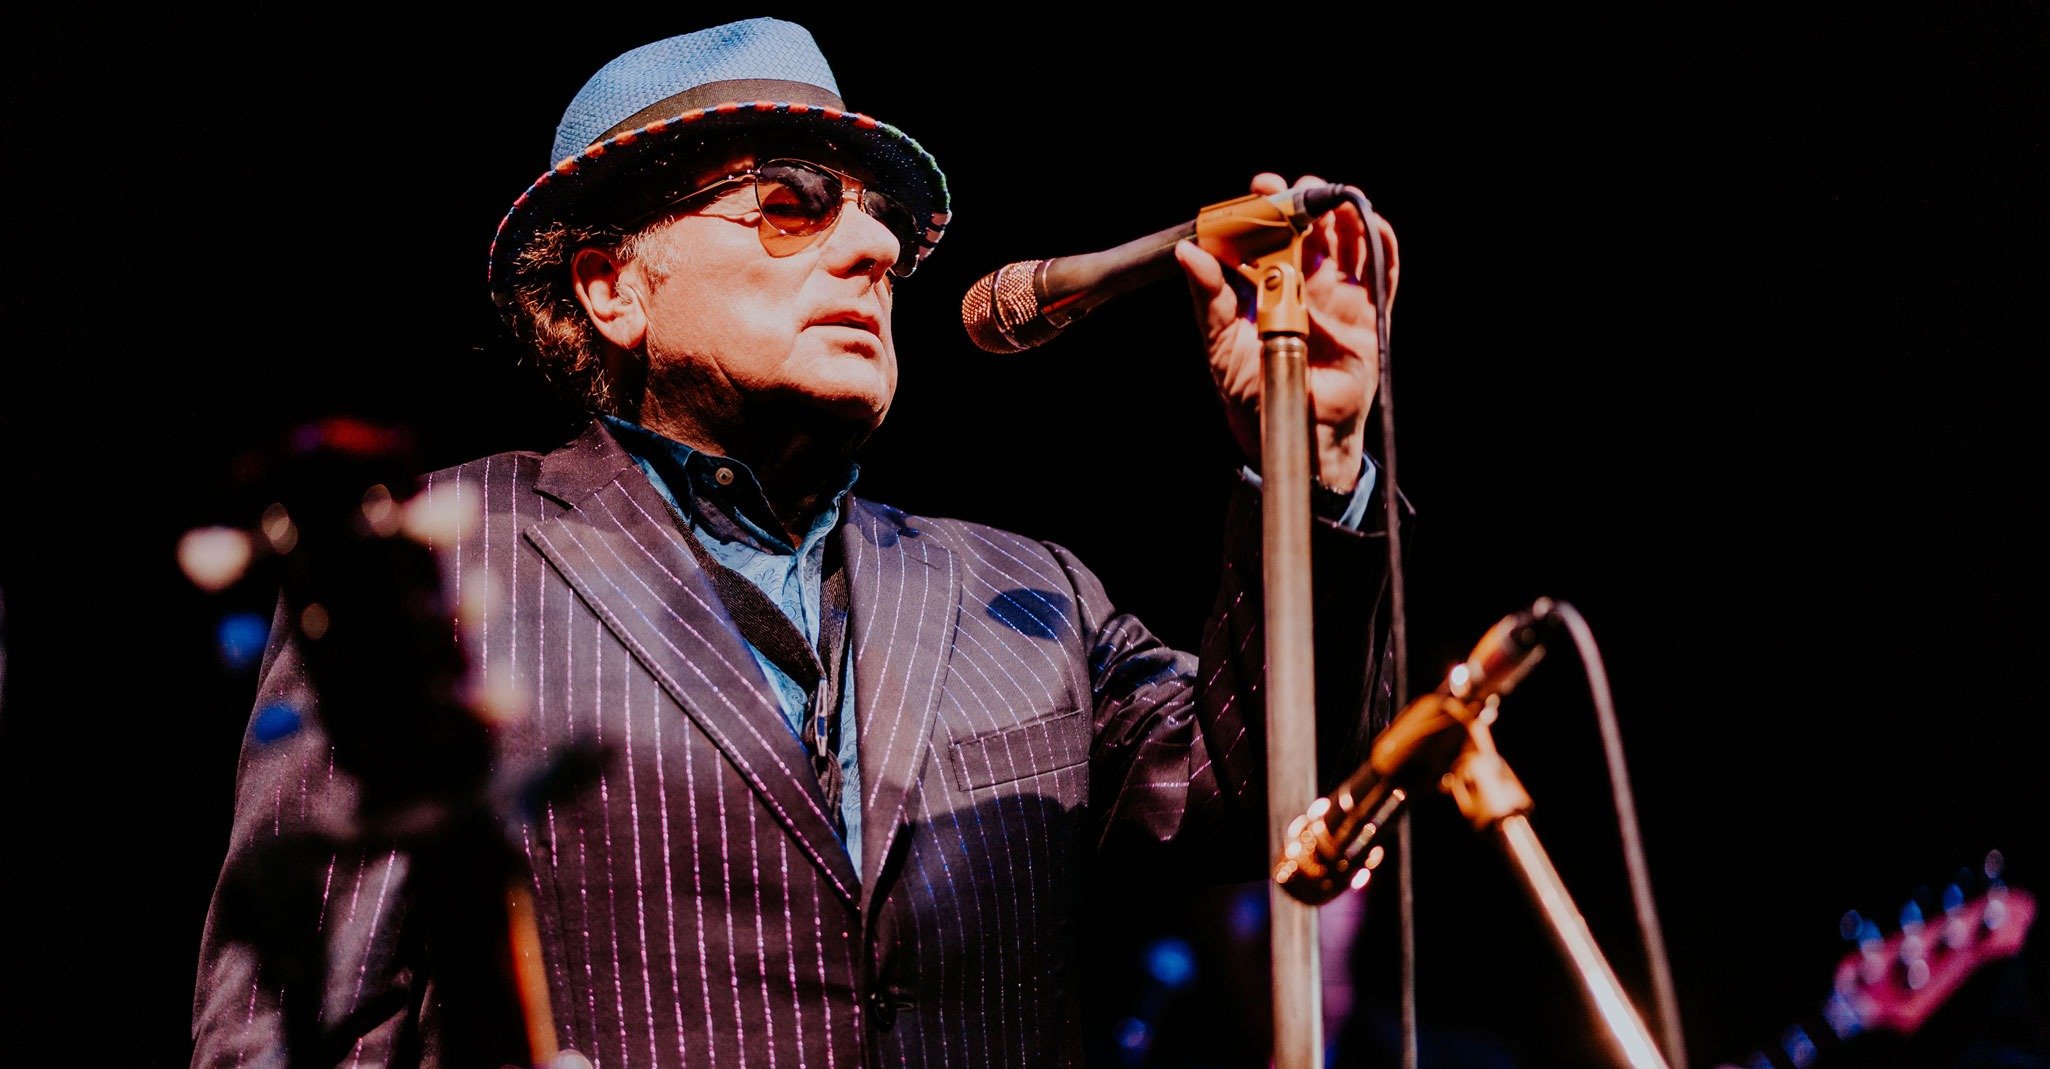 VAN MORRISON announces new album - 'THREE CHORDS AND THE TRUTH' will be released on 25th October 2019 1